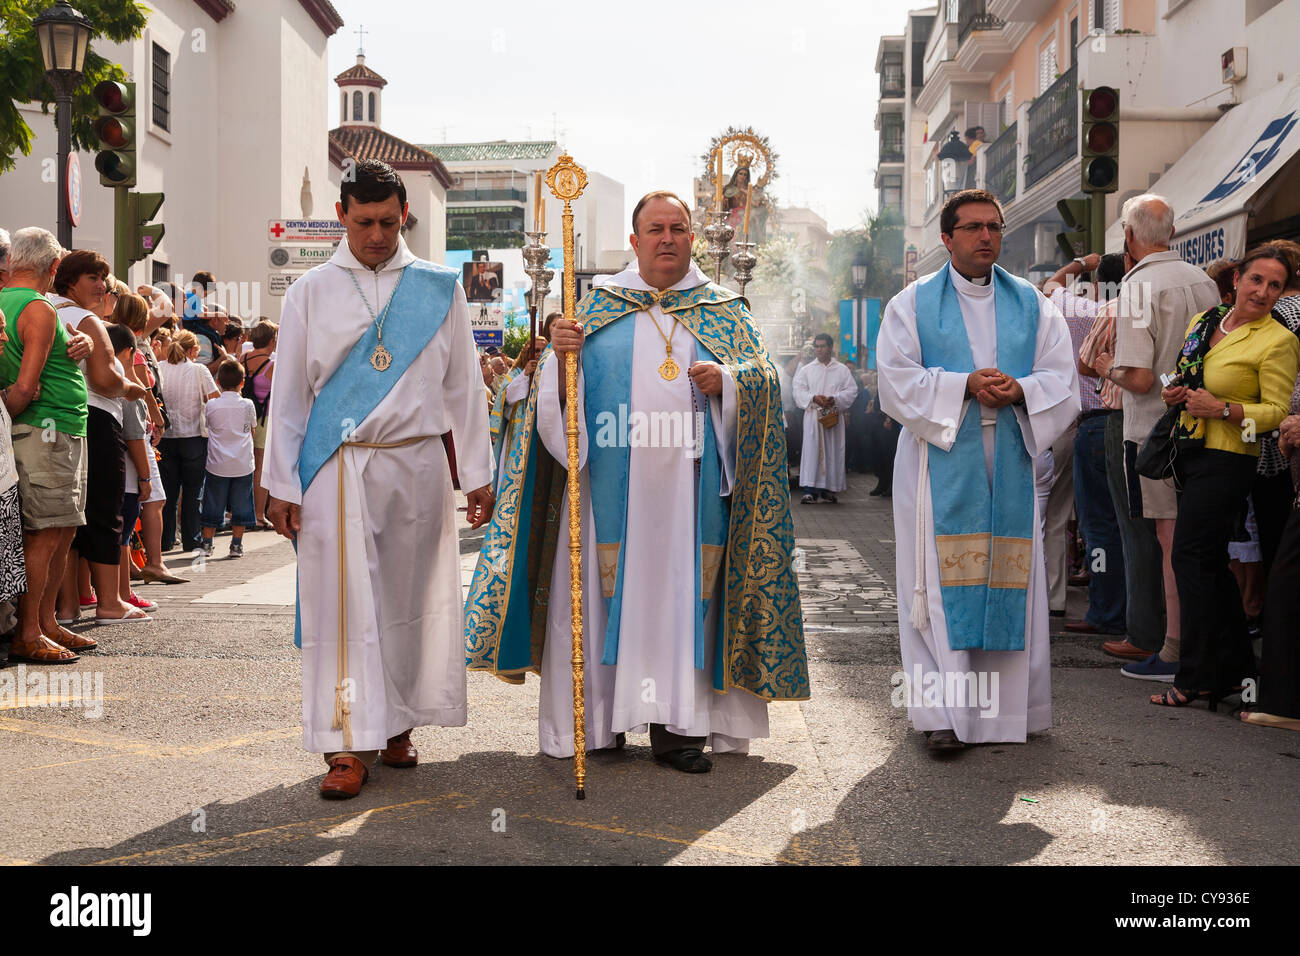 Churchman and attendants in Religious Procession. Fuengirola. Spain. Stock Photo